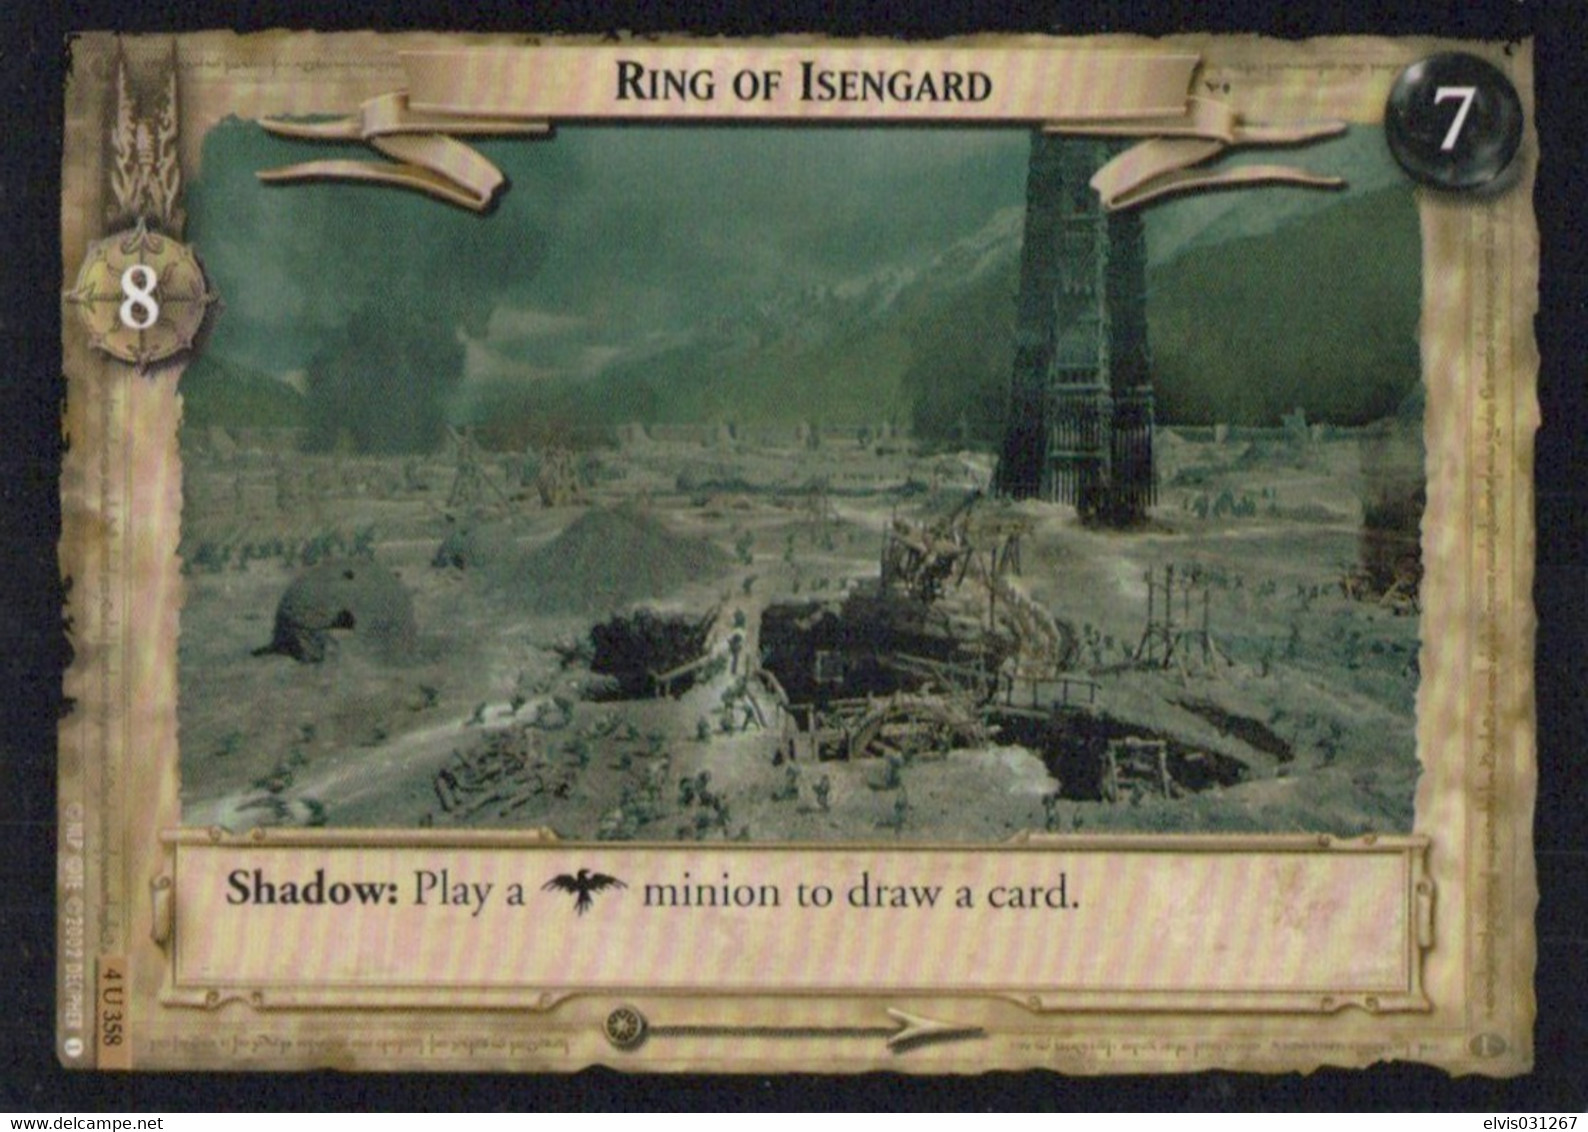 Vintage The Lord Of The Rings: #7-8 Ring Of Isengard - EN - 2001-2004 - Mint Condition - Trading Card Game - Herr Der Ringe